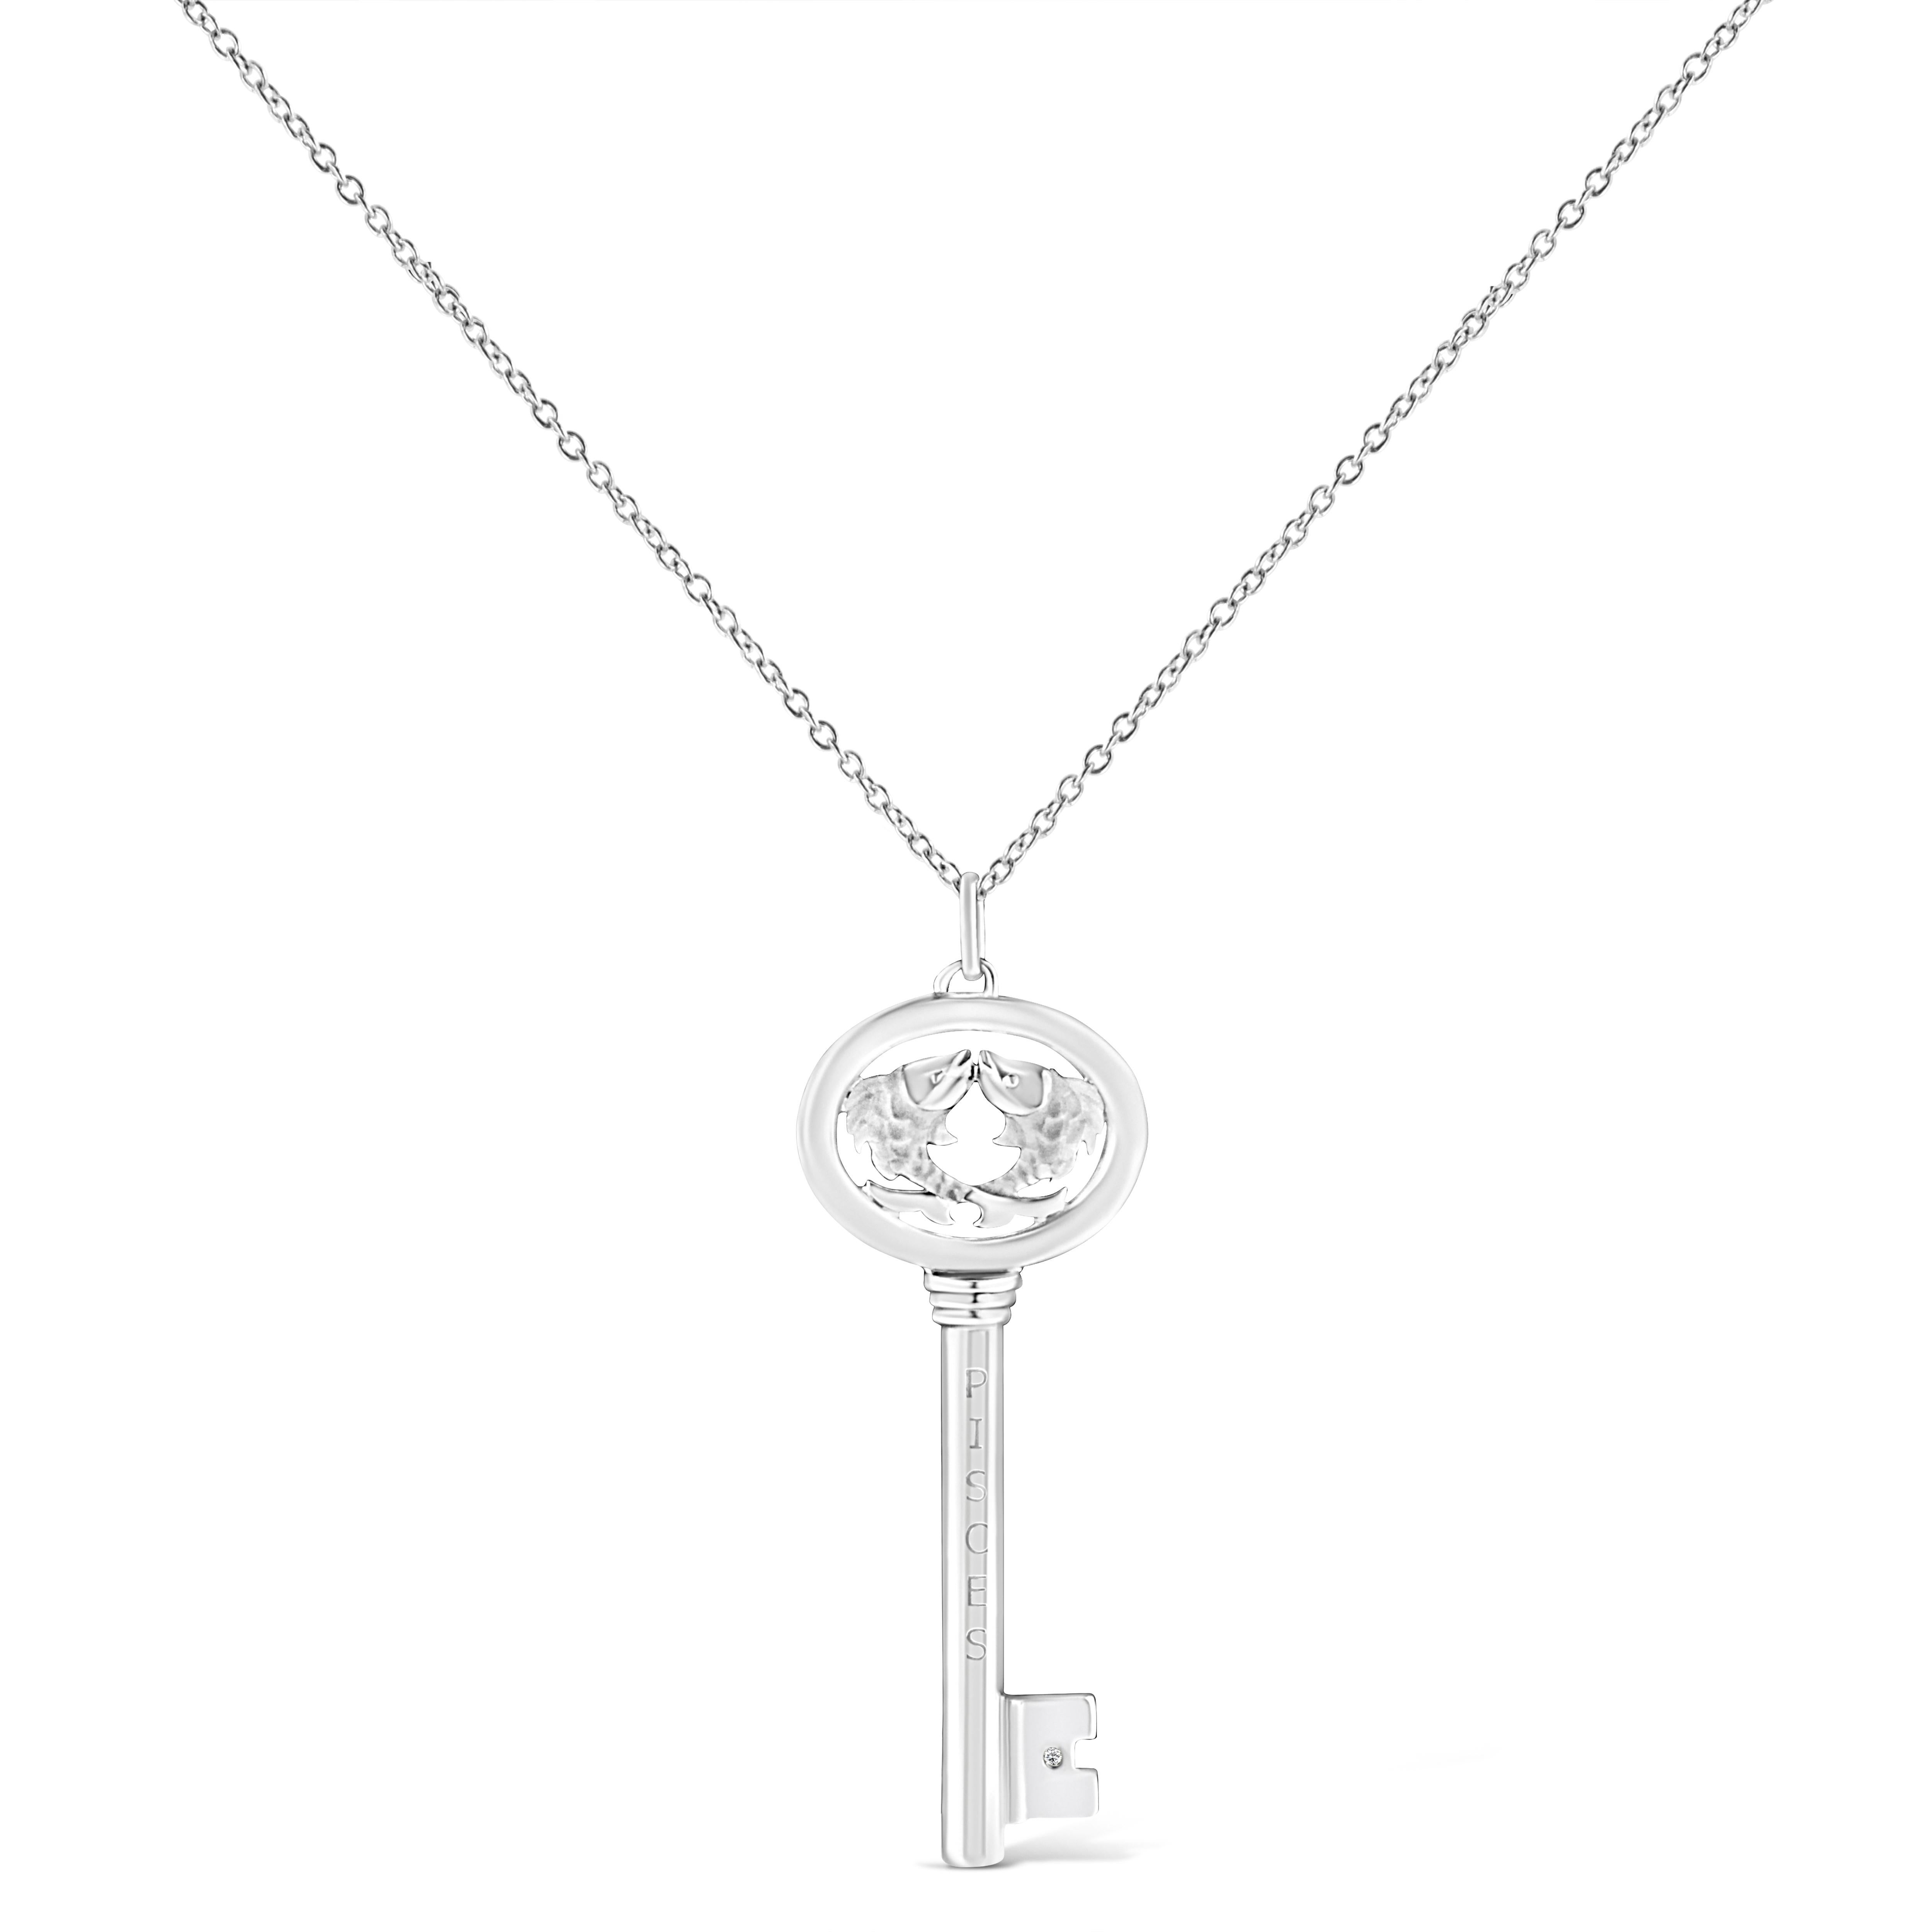 It's as if the stars aligned to create this stunning .925 Sterling Silver necklace flaunting a Pisces zodiac pendant accented by a glimmering bezel set natural diamond. Brilliant beacons of optimism and hope, our Zodiac Keys are radiant symbols of a